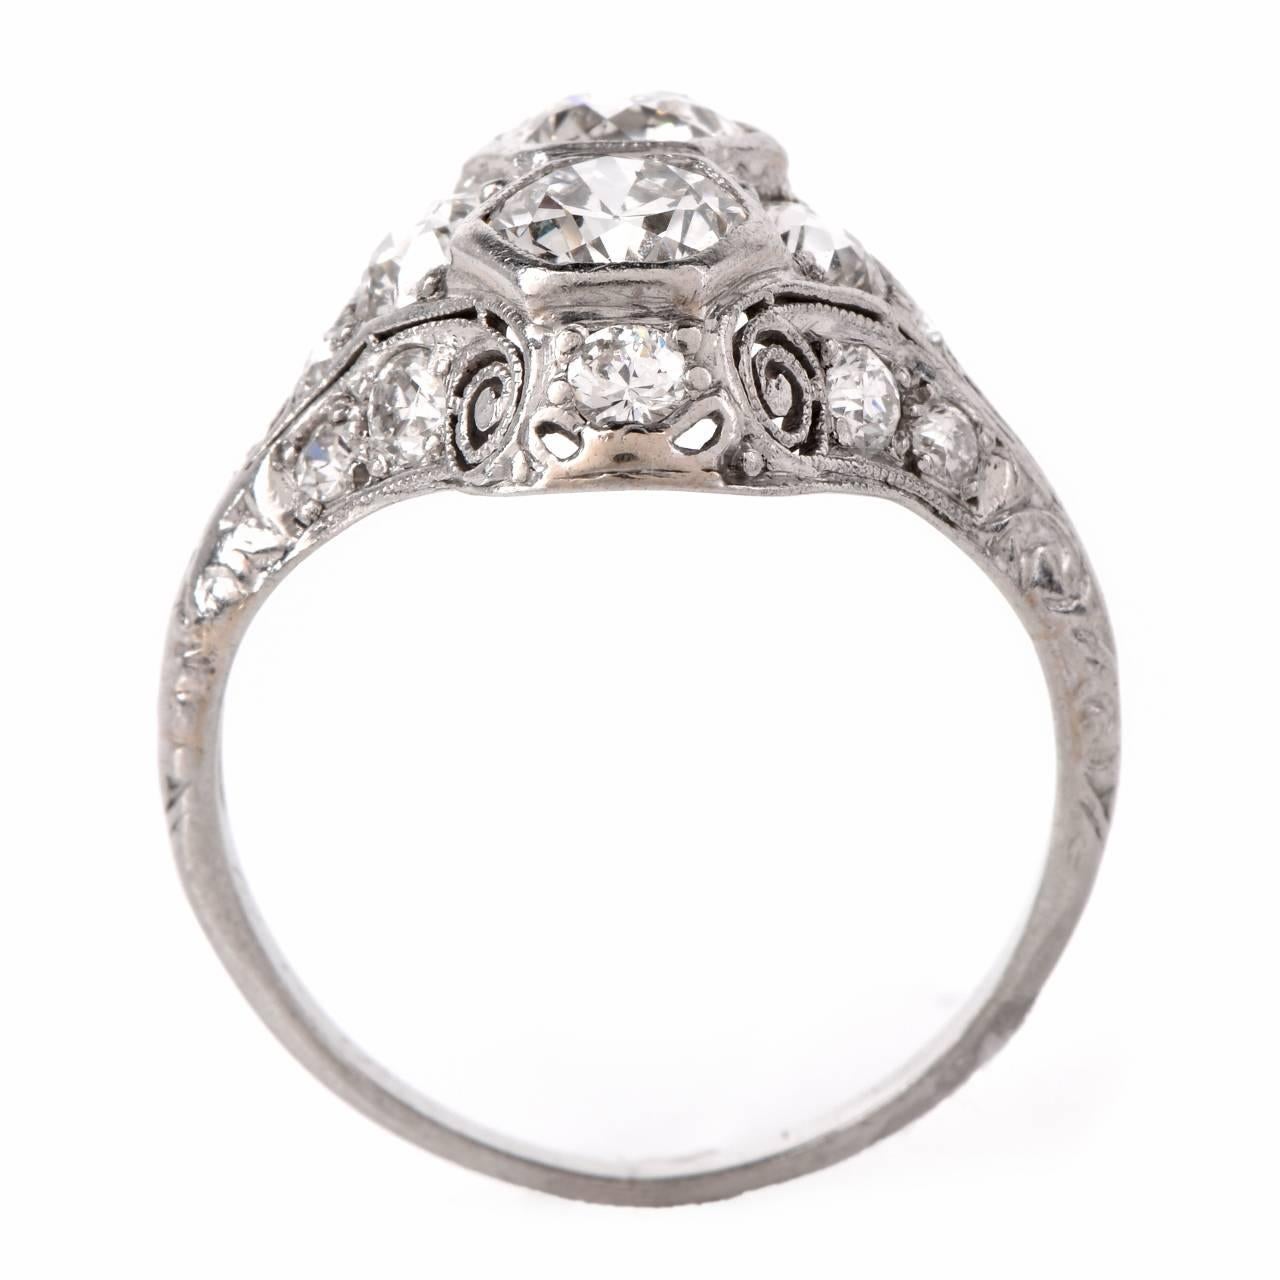 This antique Art Deco engagement ring with sparkling European-cut diamonds is crafted in solid platinum, weighing 3.5 grams and measuring 13mm wide. Incorporating a stylized hexagonal plaque, this alluringly feminine engagement ring is adorned with